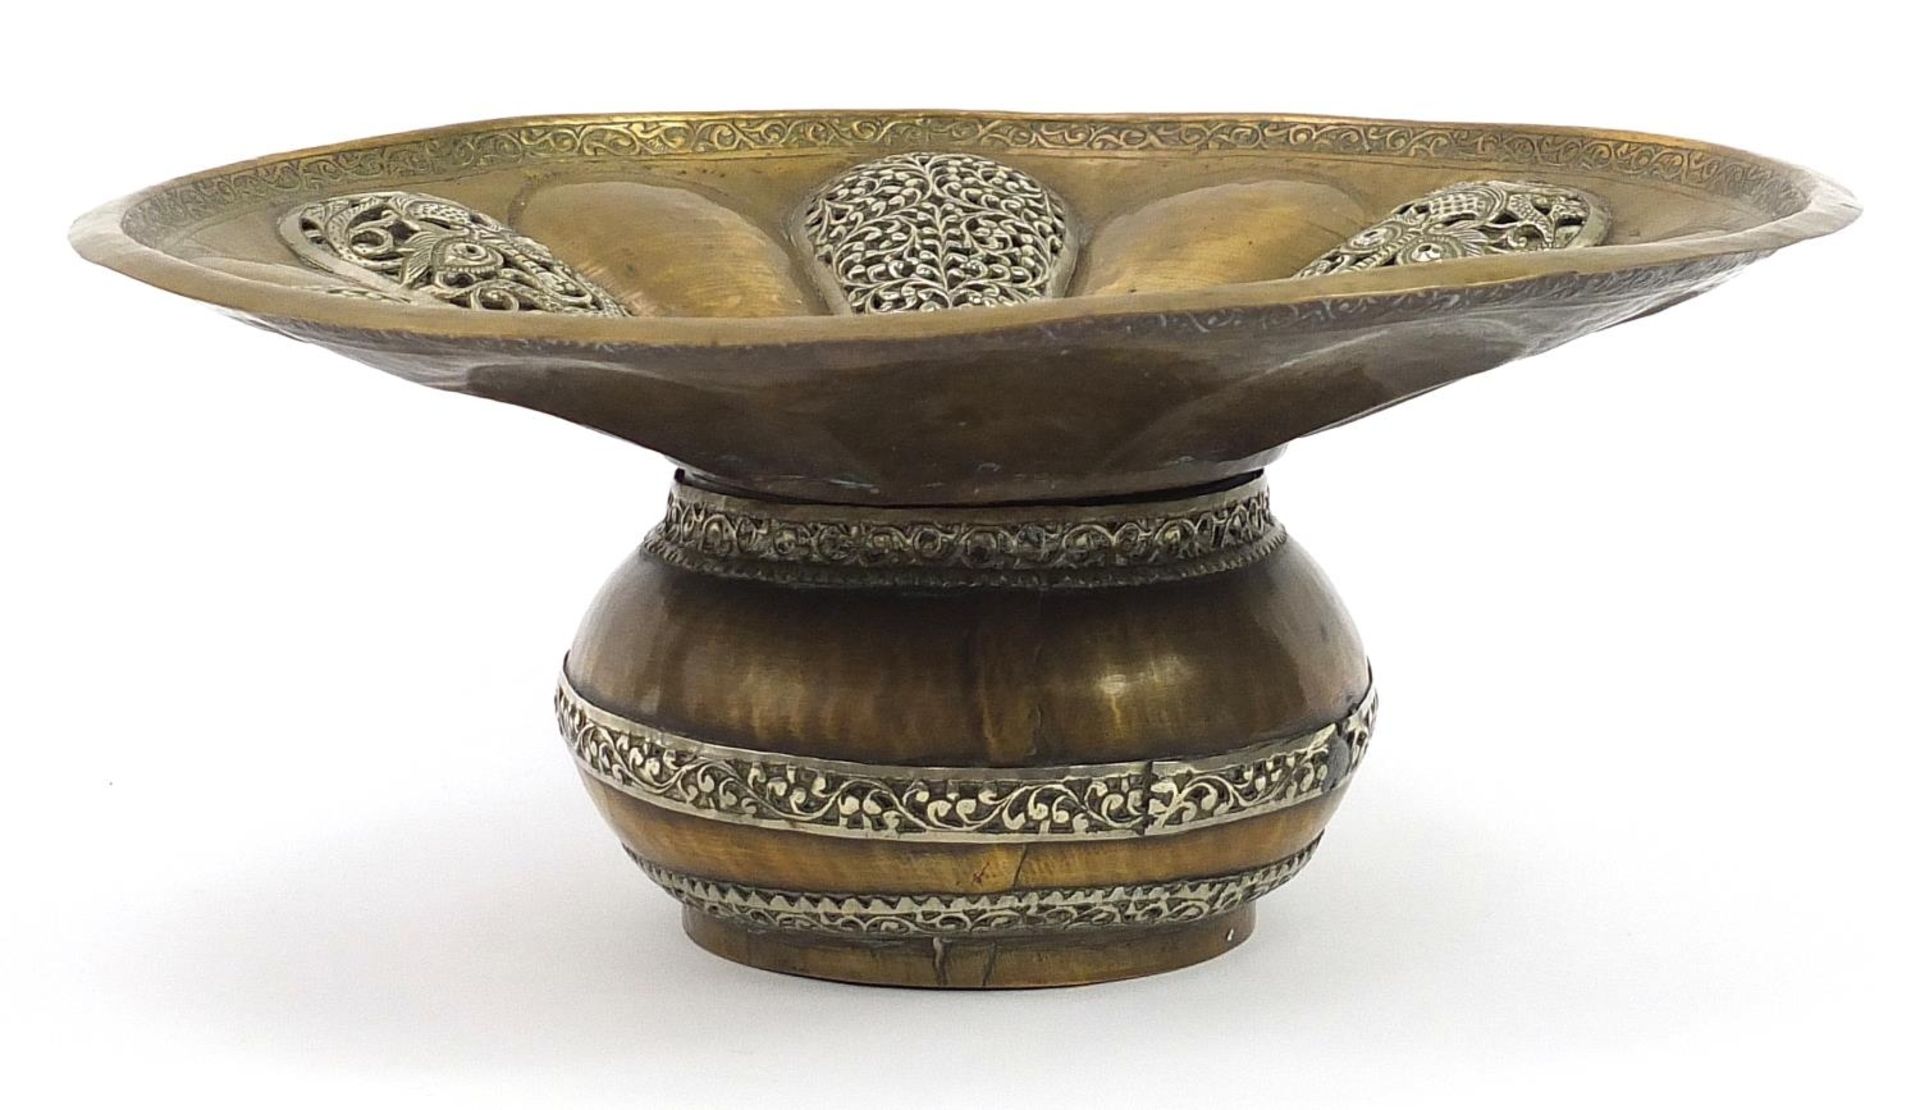 Islamic bronze incense burner with silver overlay and pierced lid, 31cm in diameter - Image 2 of 4